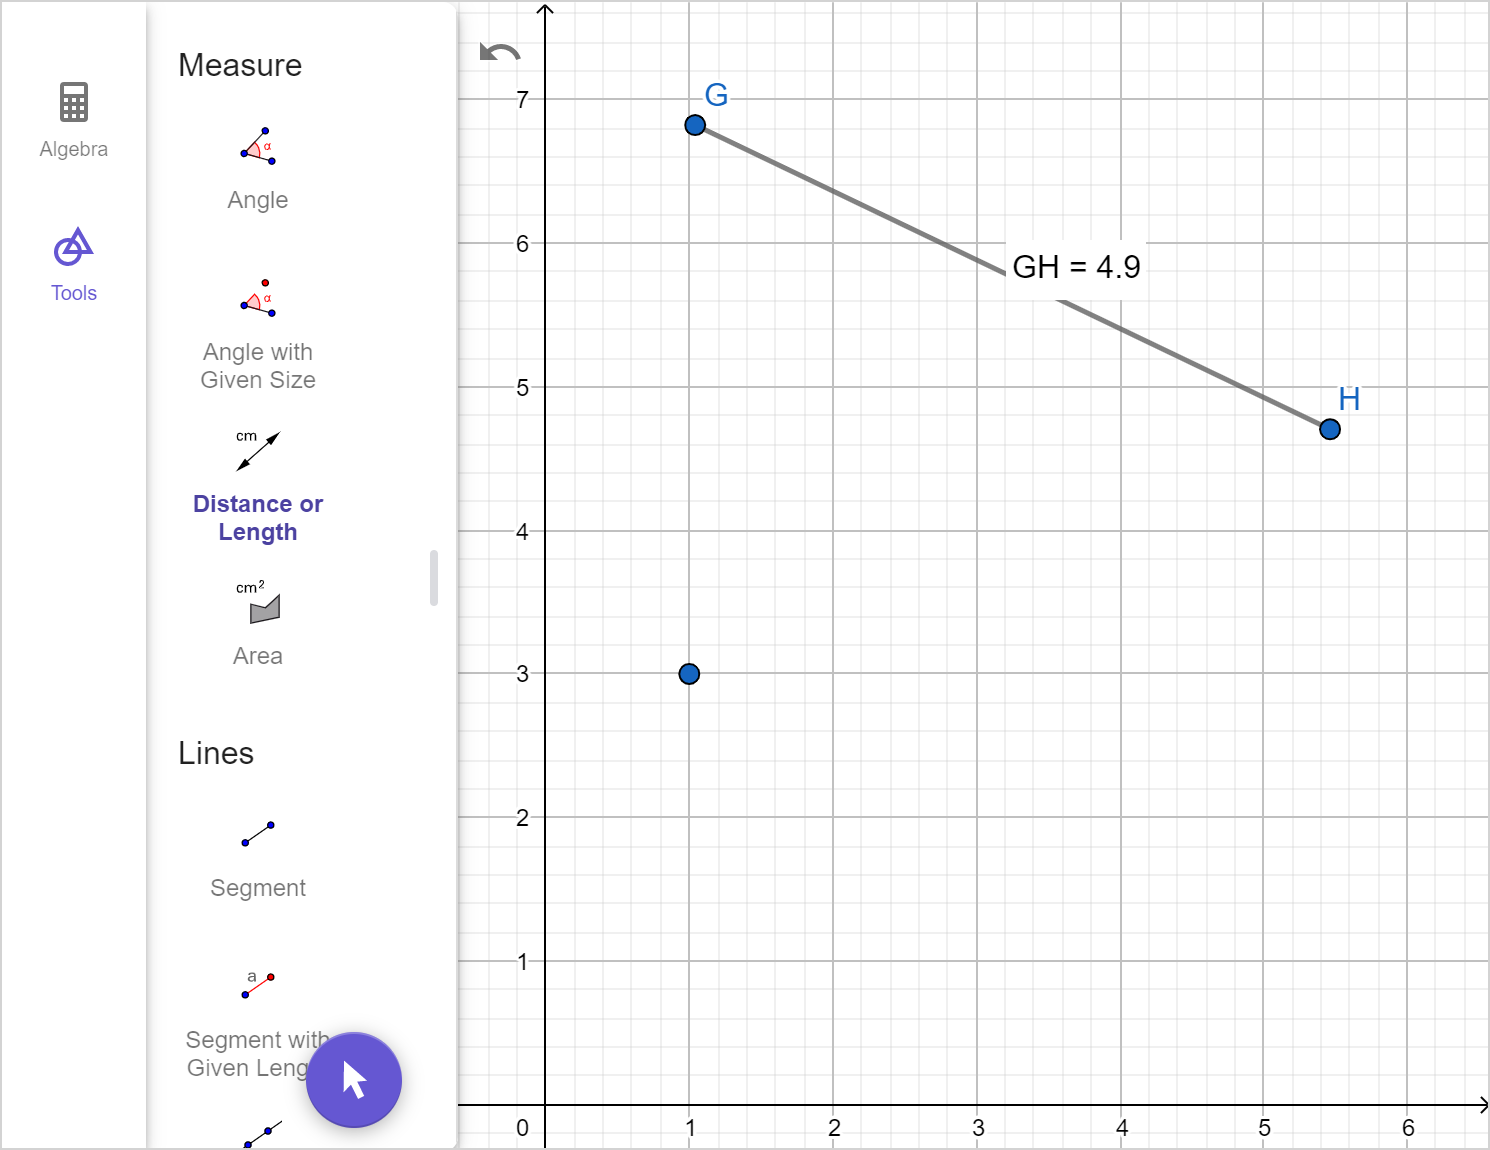 A screenshot of the GeoGebra geometry tool showing segment G H and its length and a point. Speak to your teacher for more details.